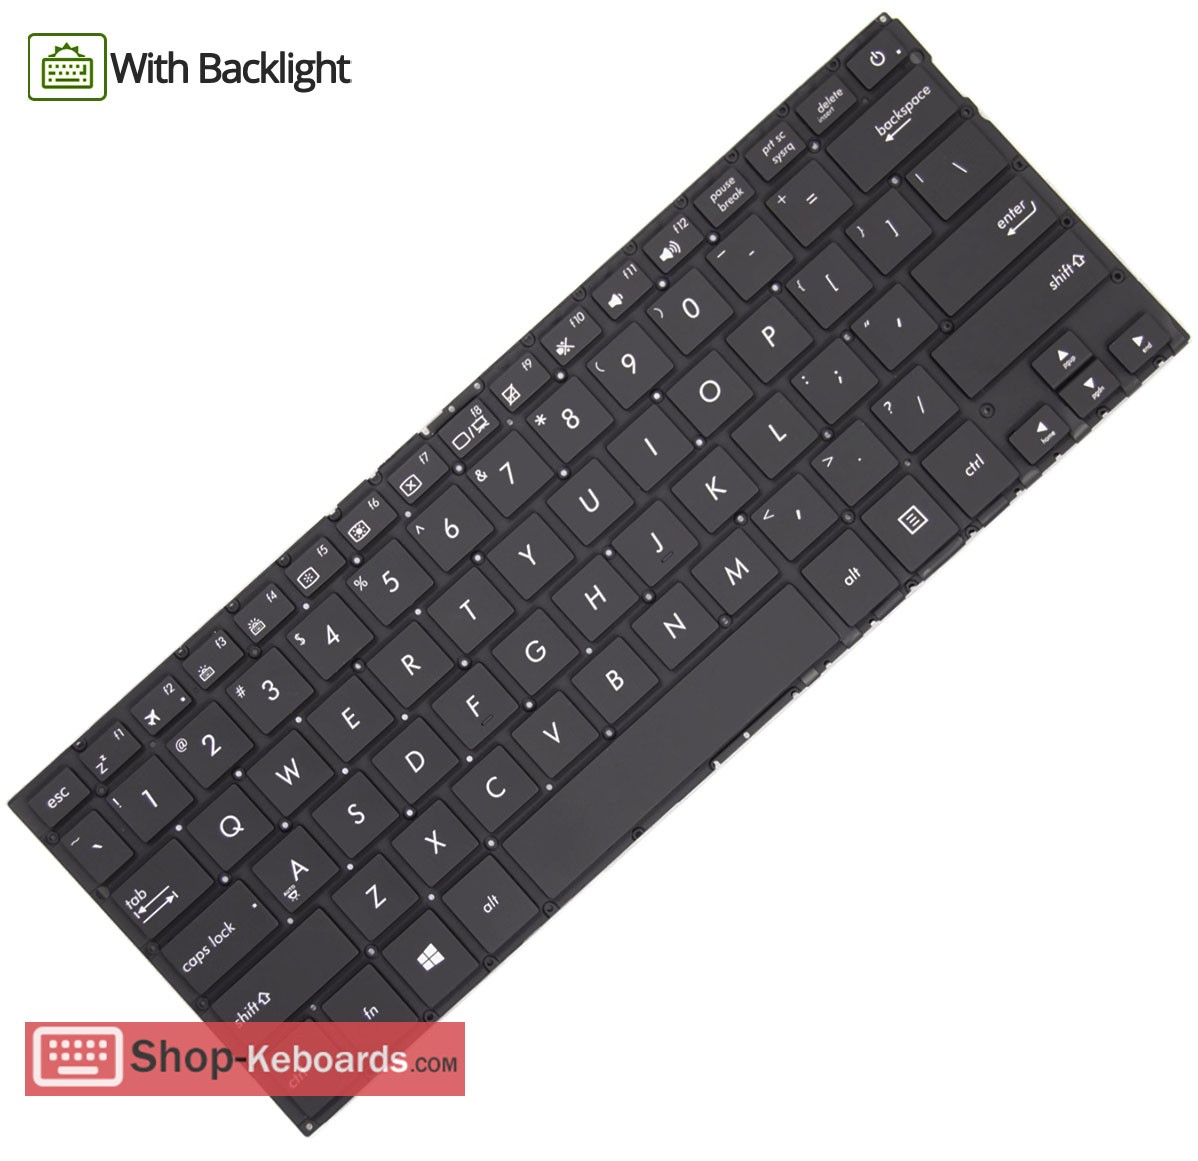 Asus 0KNB0-212CUK00 Keyboard replacement